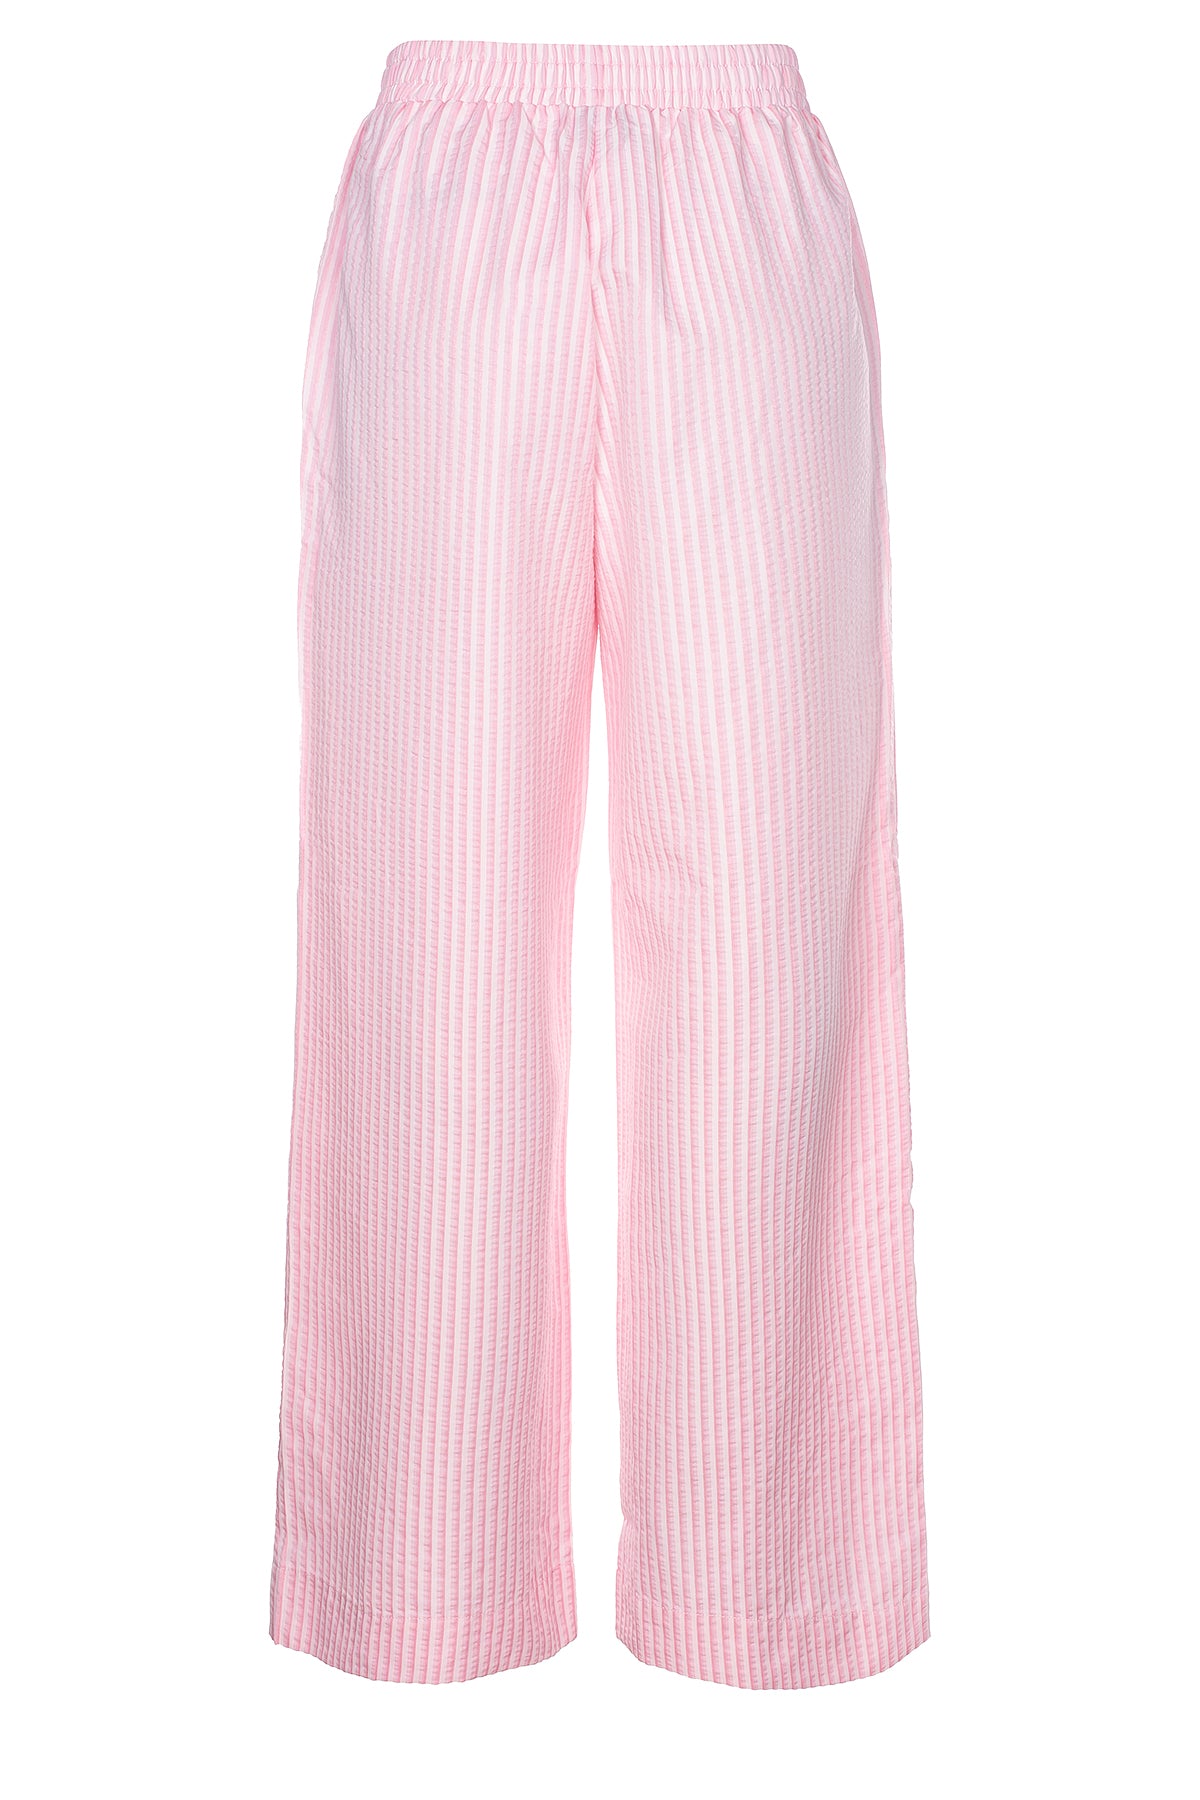 LUXZUZ // ONE TWO Eilee Pant Pant 380 Sachet Pink